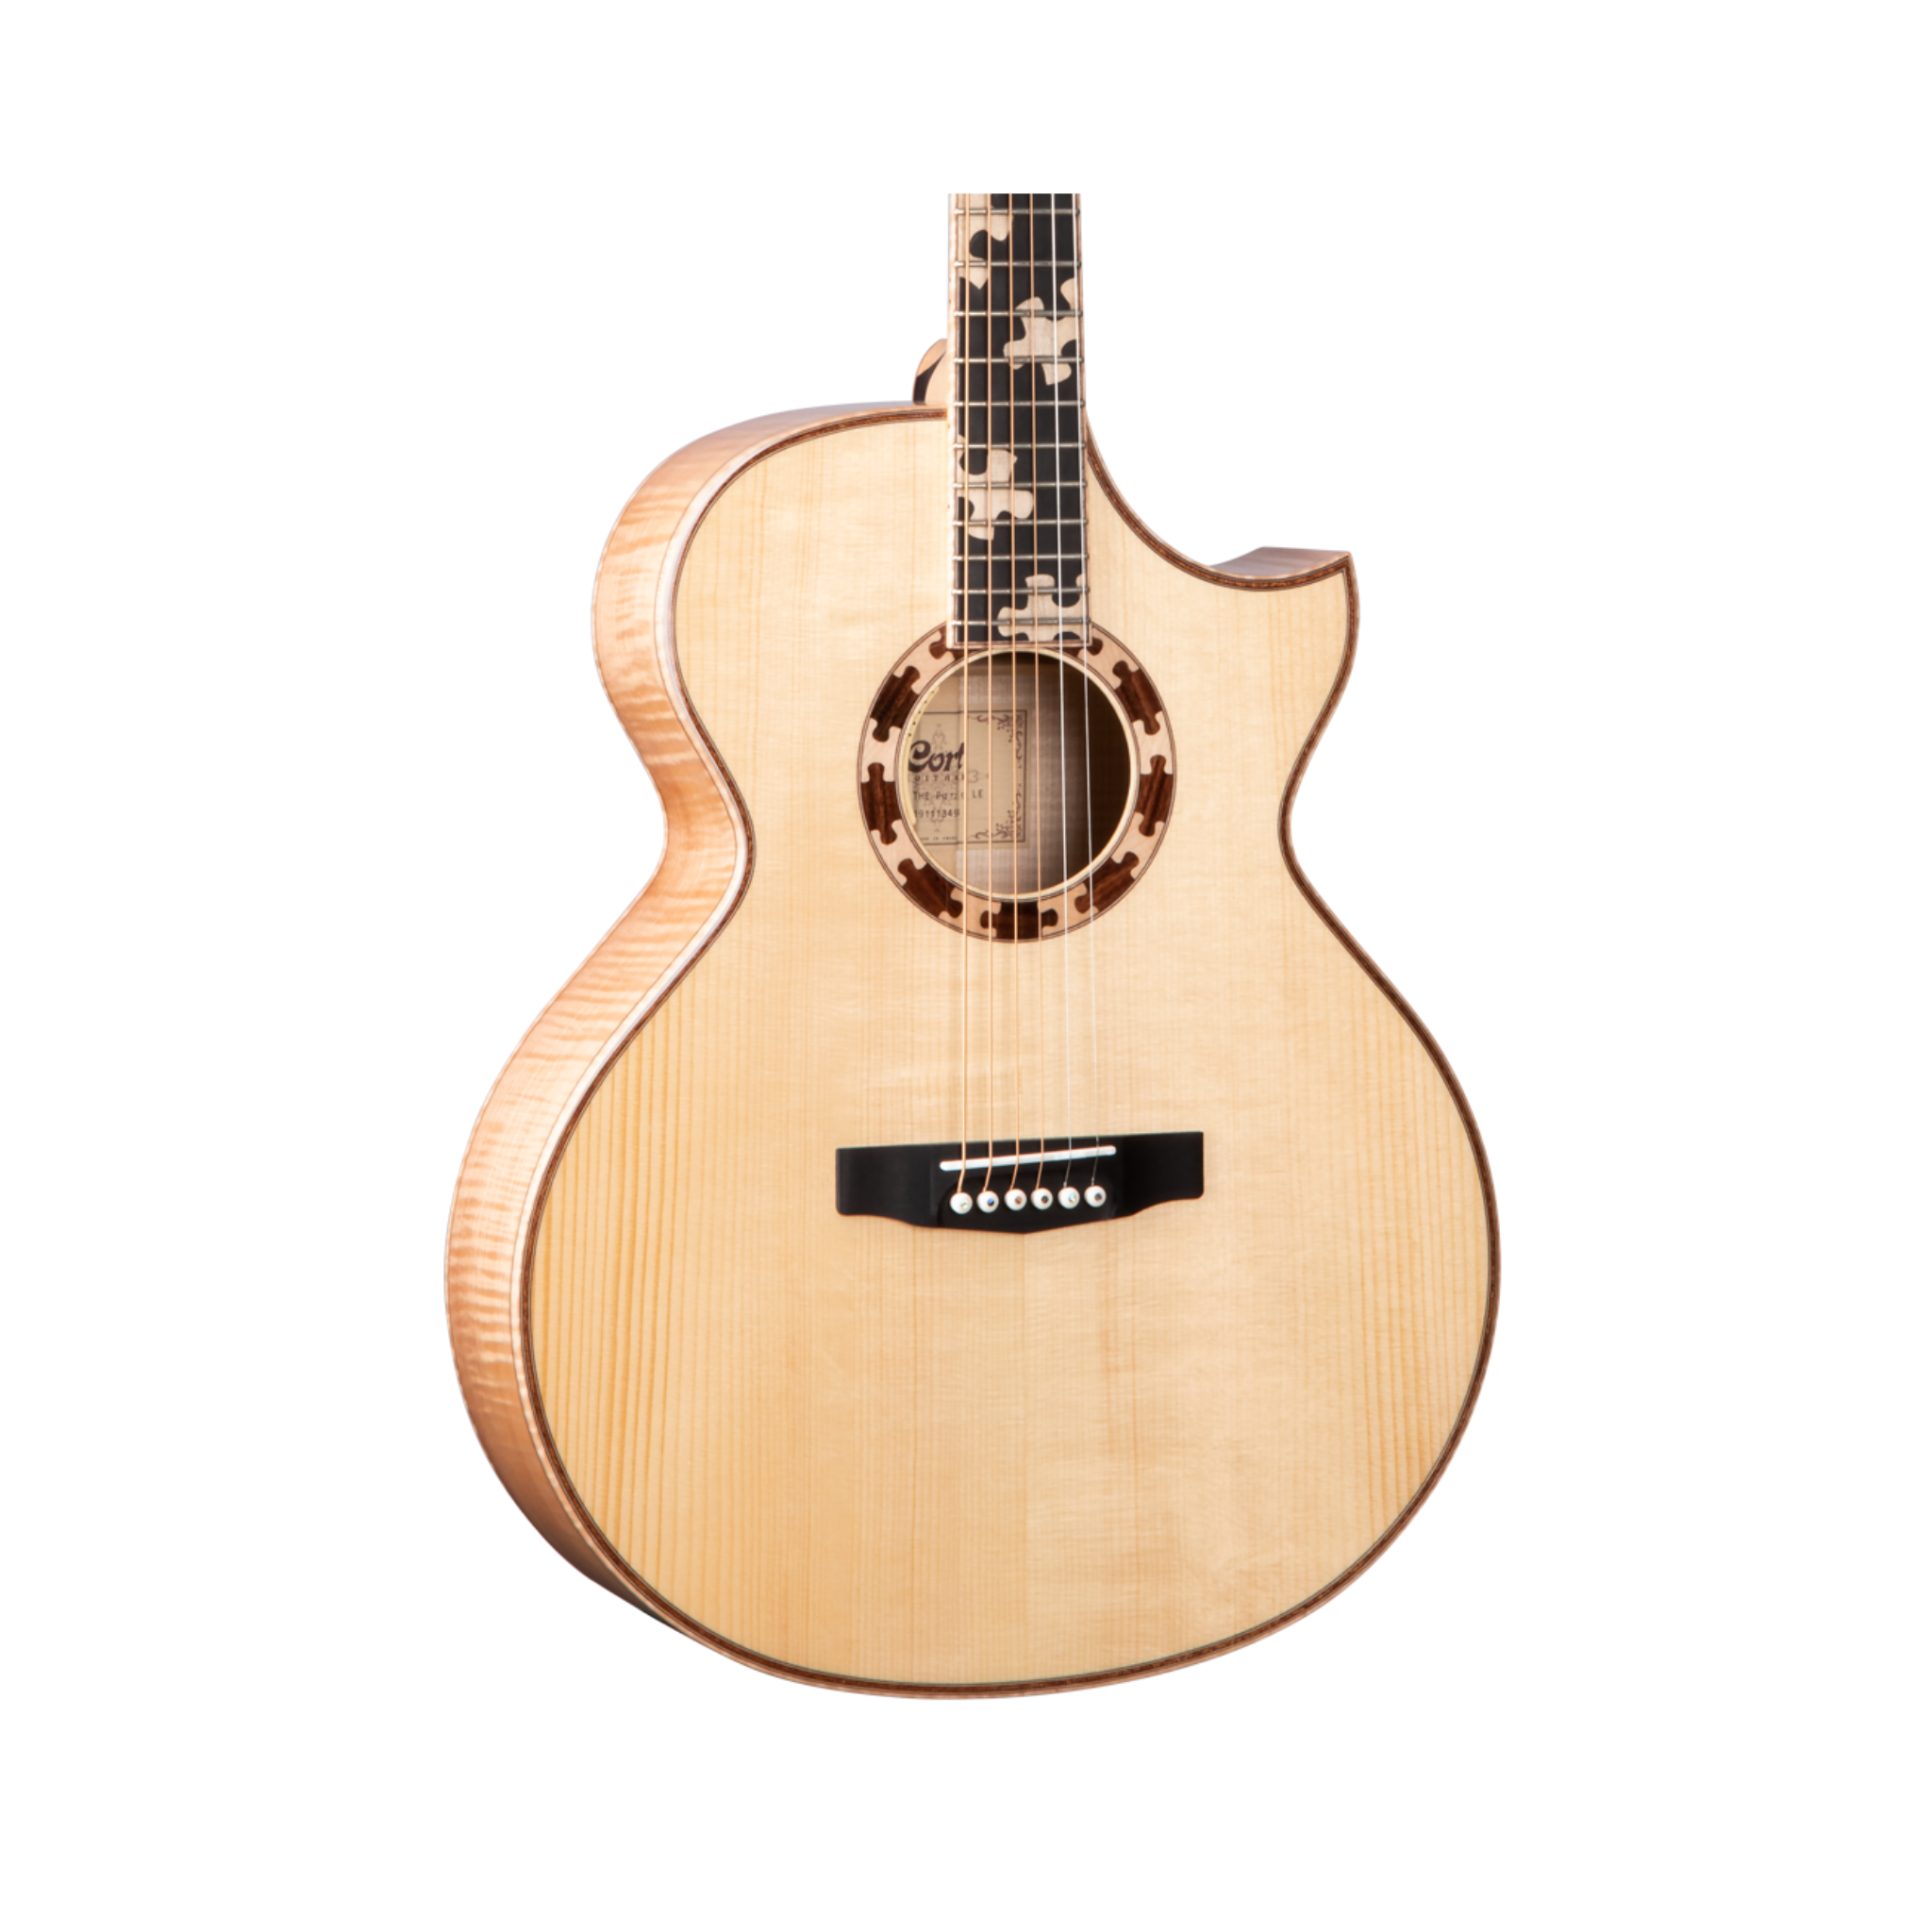 Solid Adirondack Spruce Top / Solid Flamed Maple Back & Sides